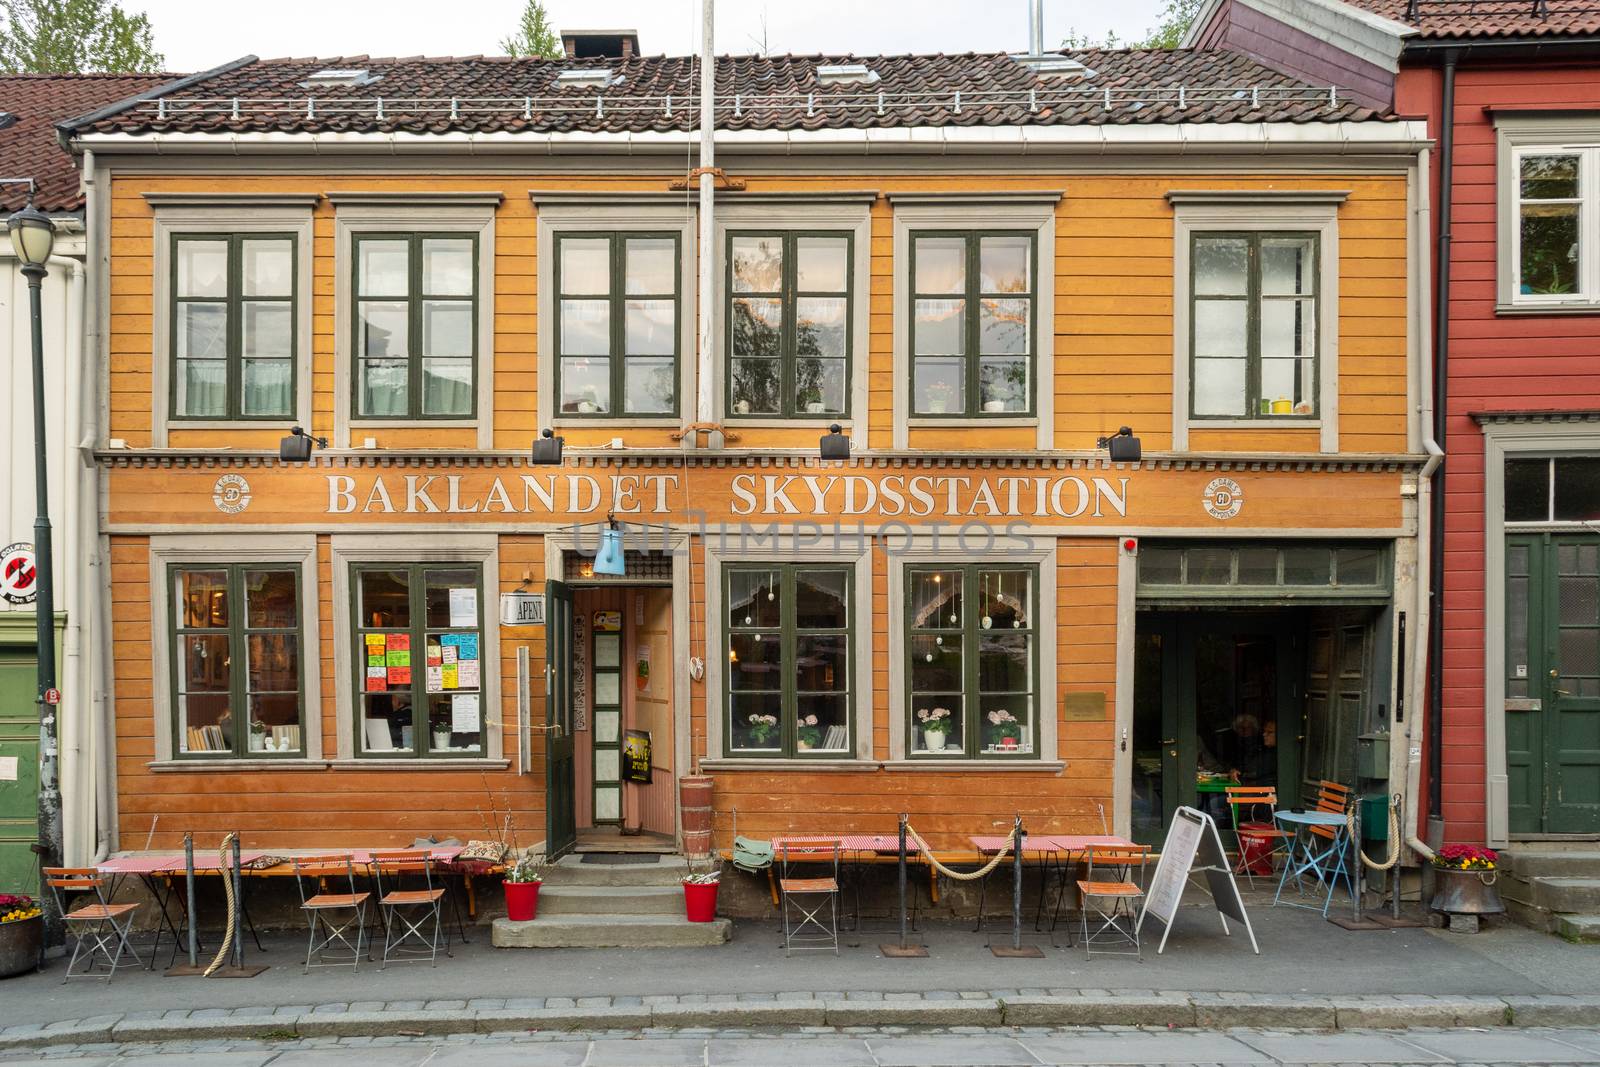 Trondheim, Norway, May 2015: Baklandet Skydsstation idyllic and peaceful cafe where you can enjoy delicious food and drinks in a traditional setting.